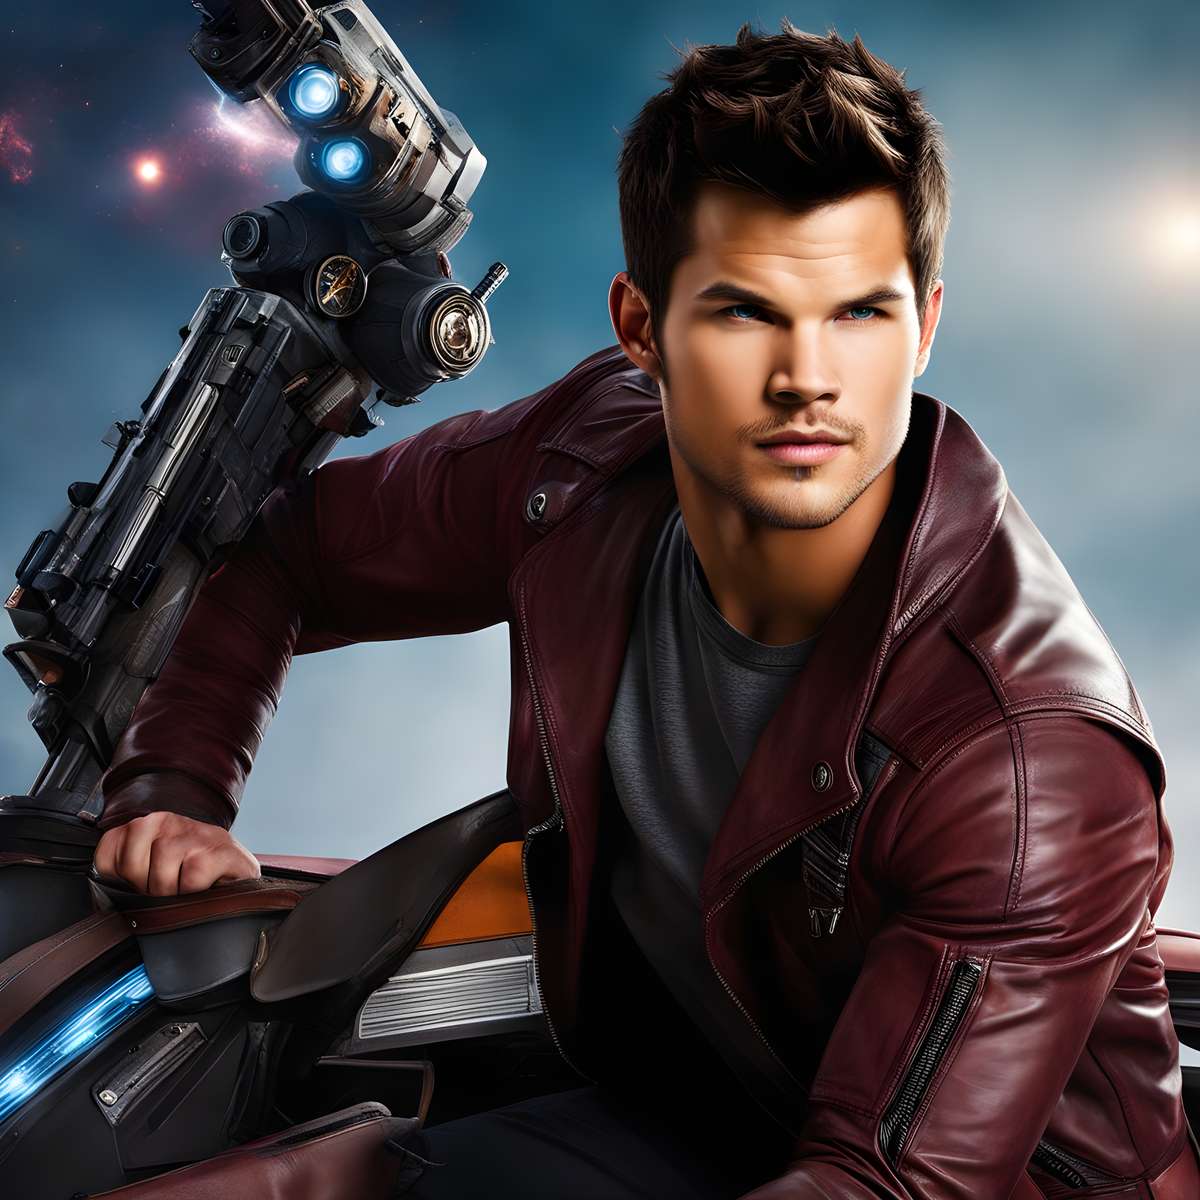 Taylor Lautner als Star Lord Online-Puzzle